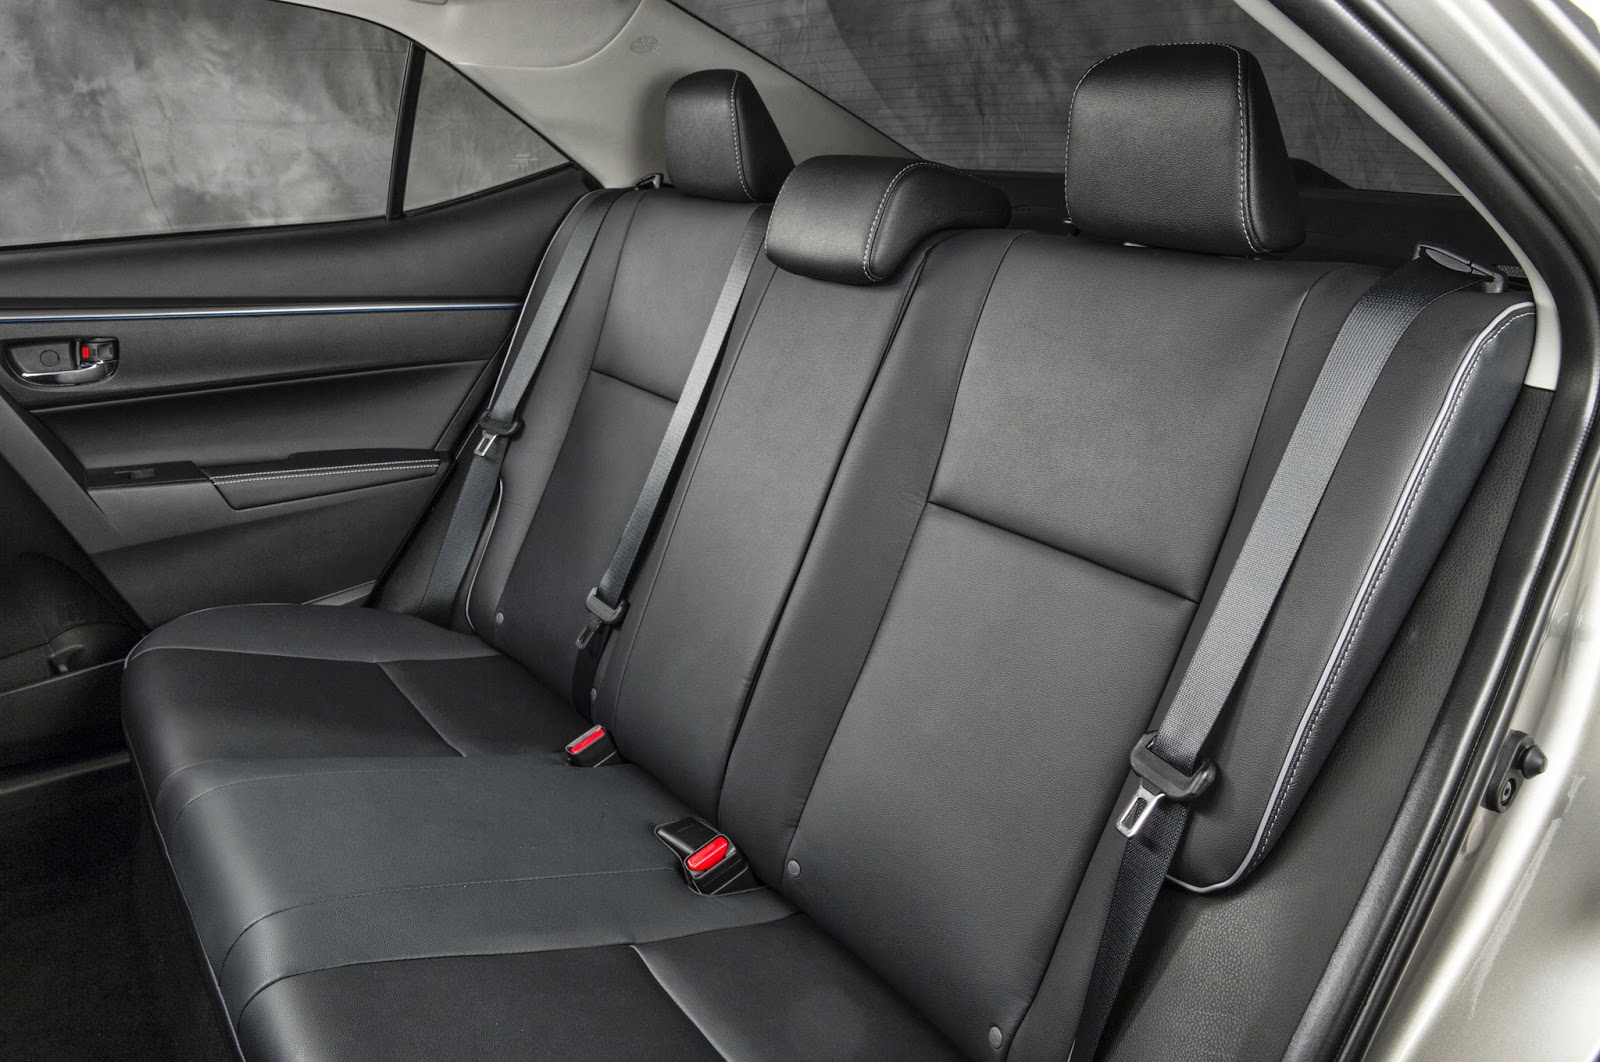 Fred Anderson Toyota: Feature Focus: 2014 Corolla SofTex Seats